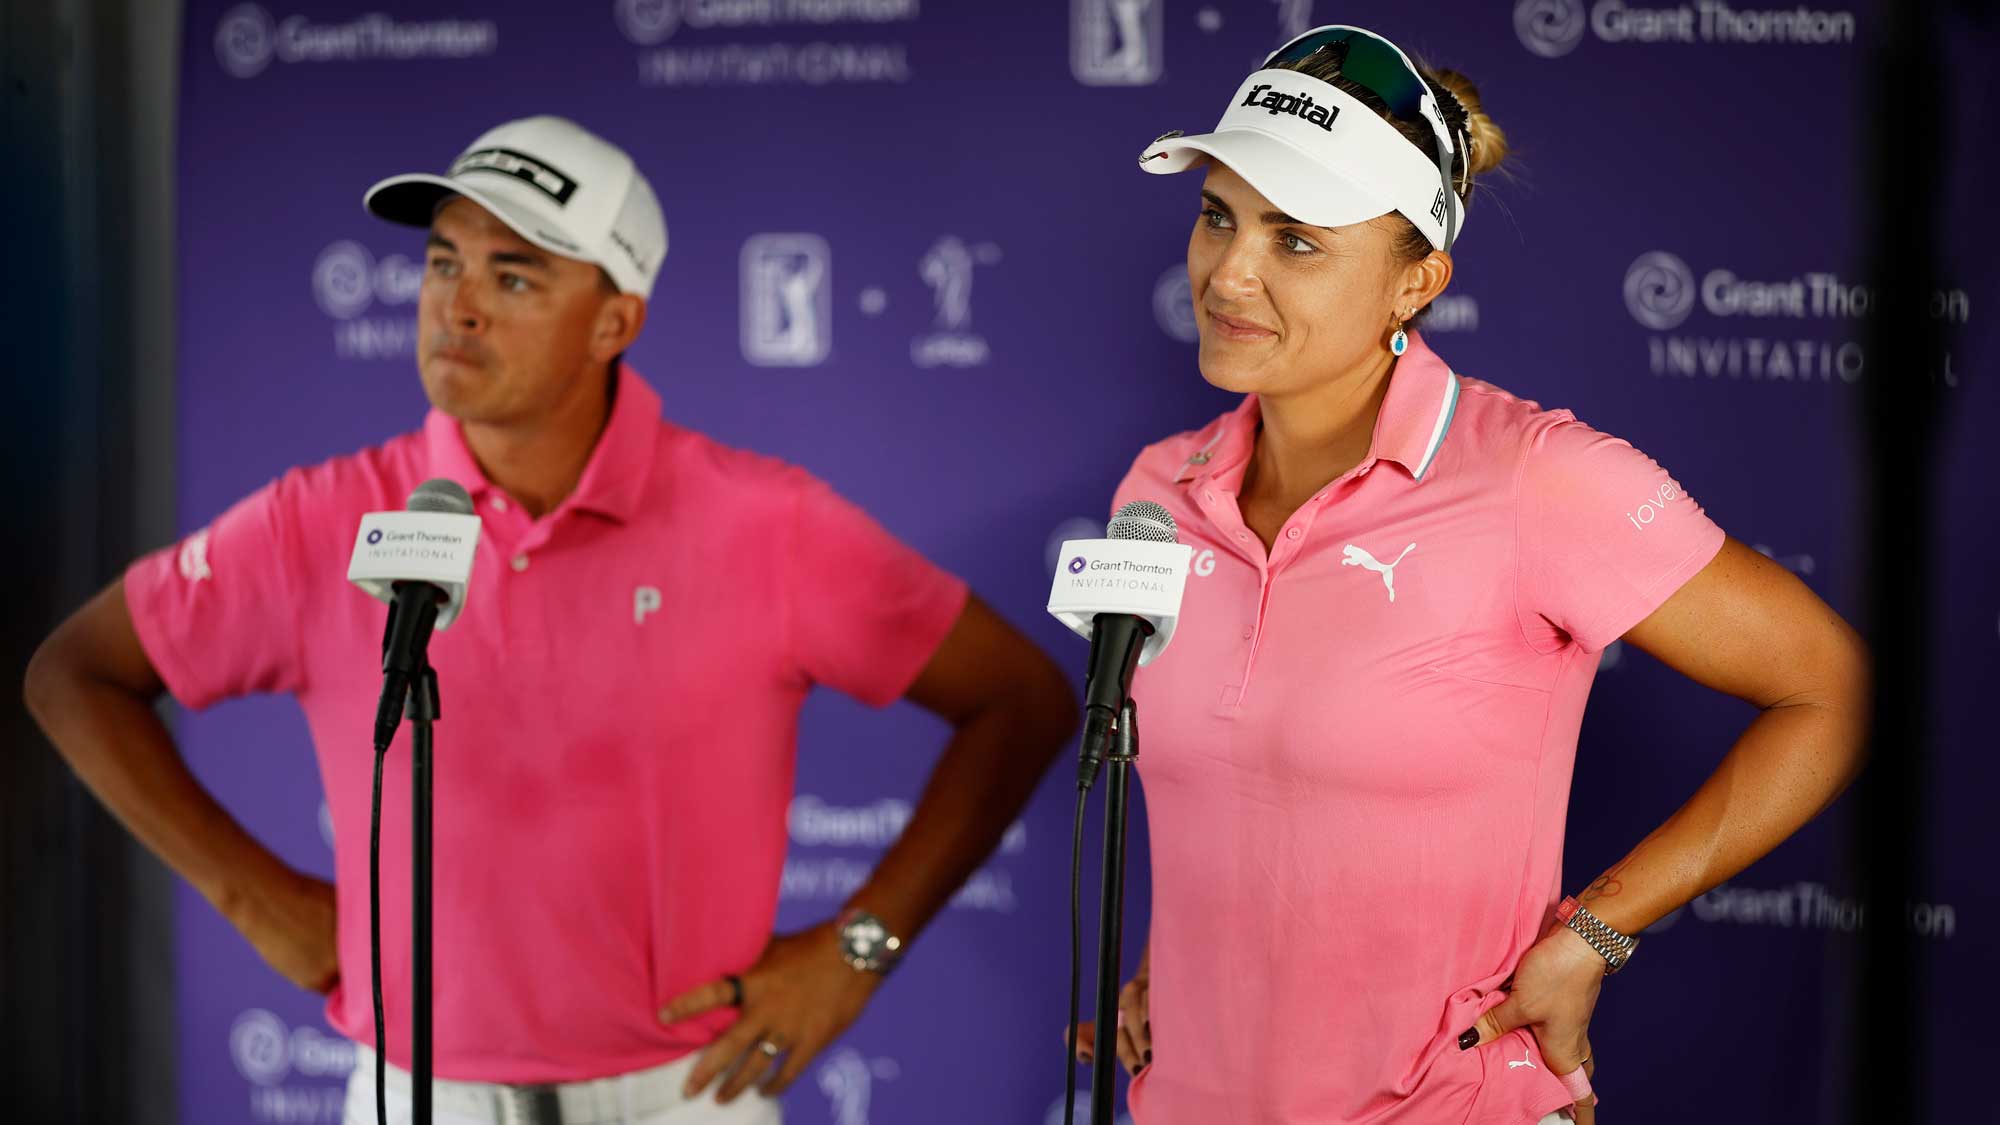 Lexi Thompson and Rickie Fowler